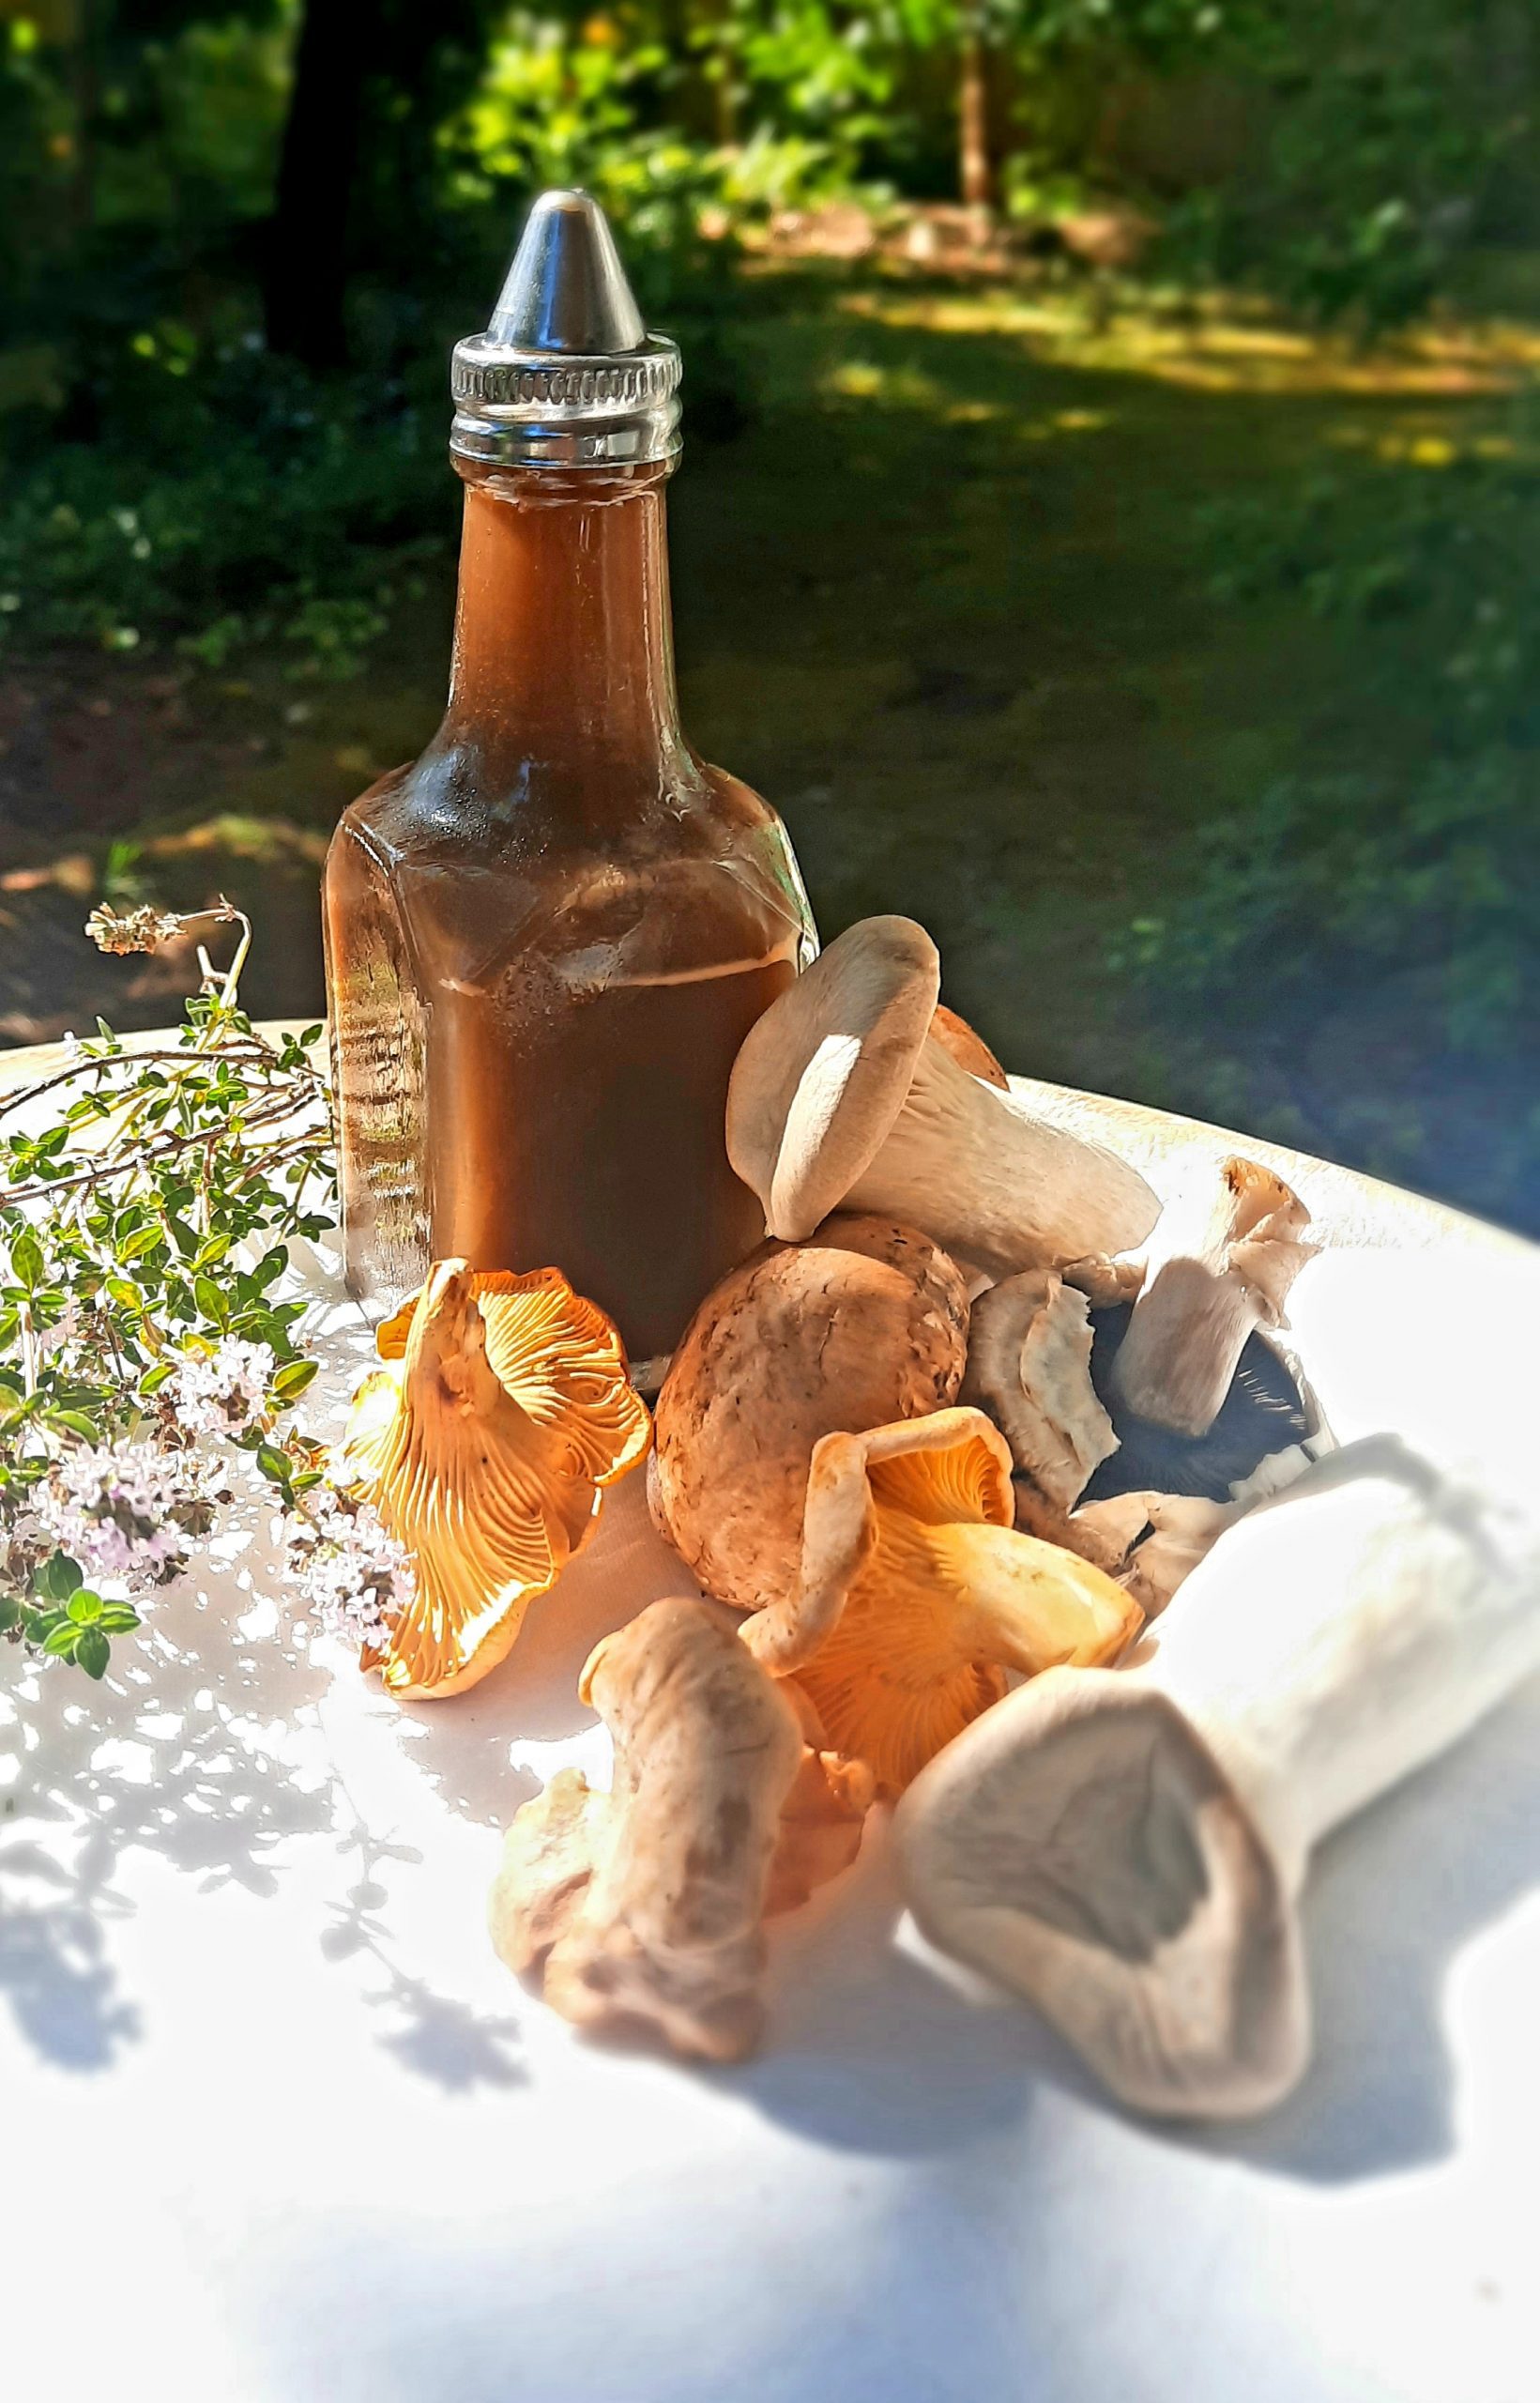 Mushroom ketchup: This recipe is a blast from the distant past